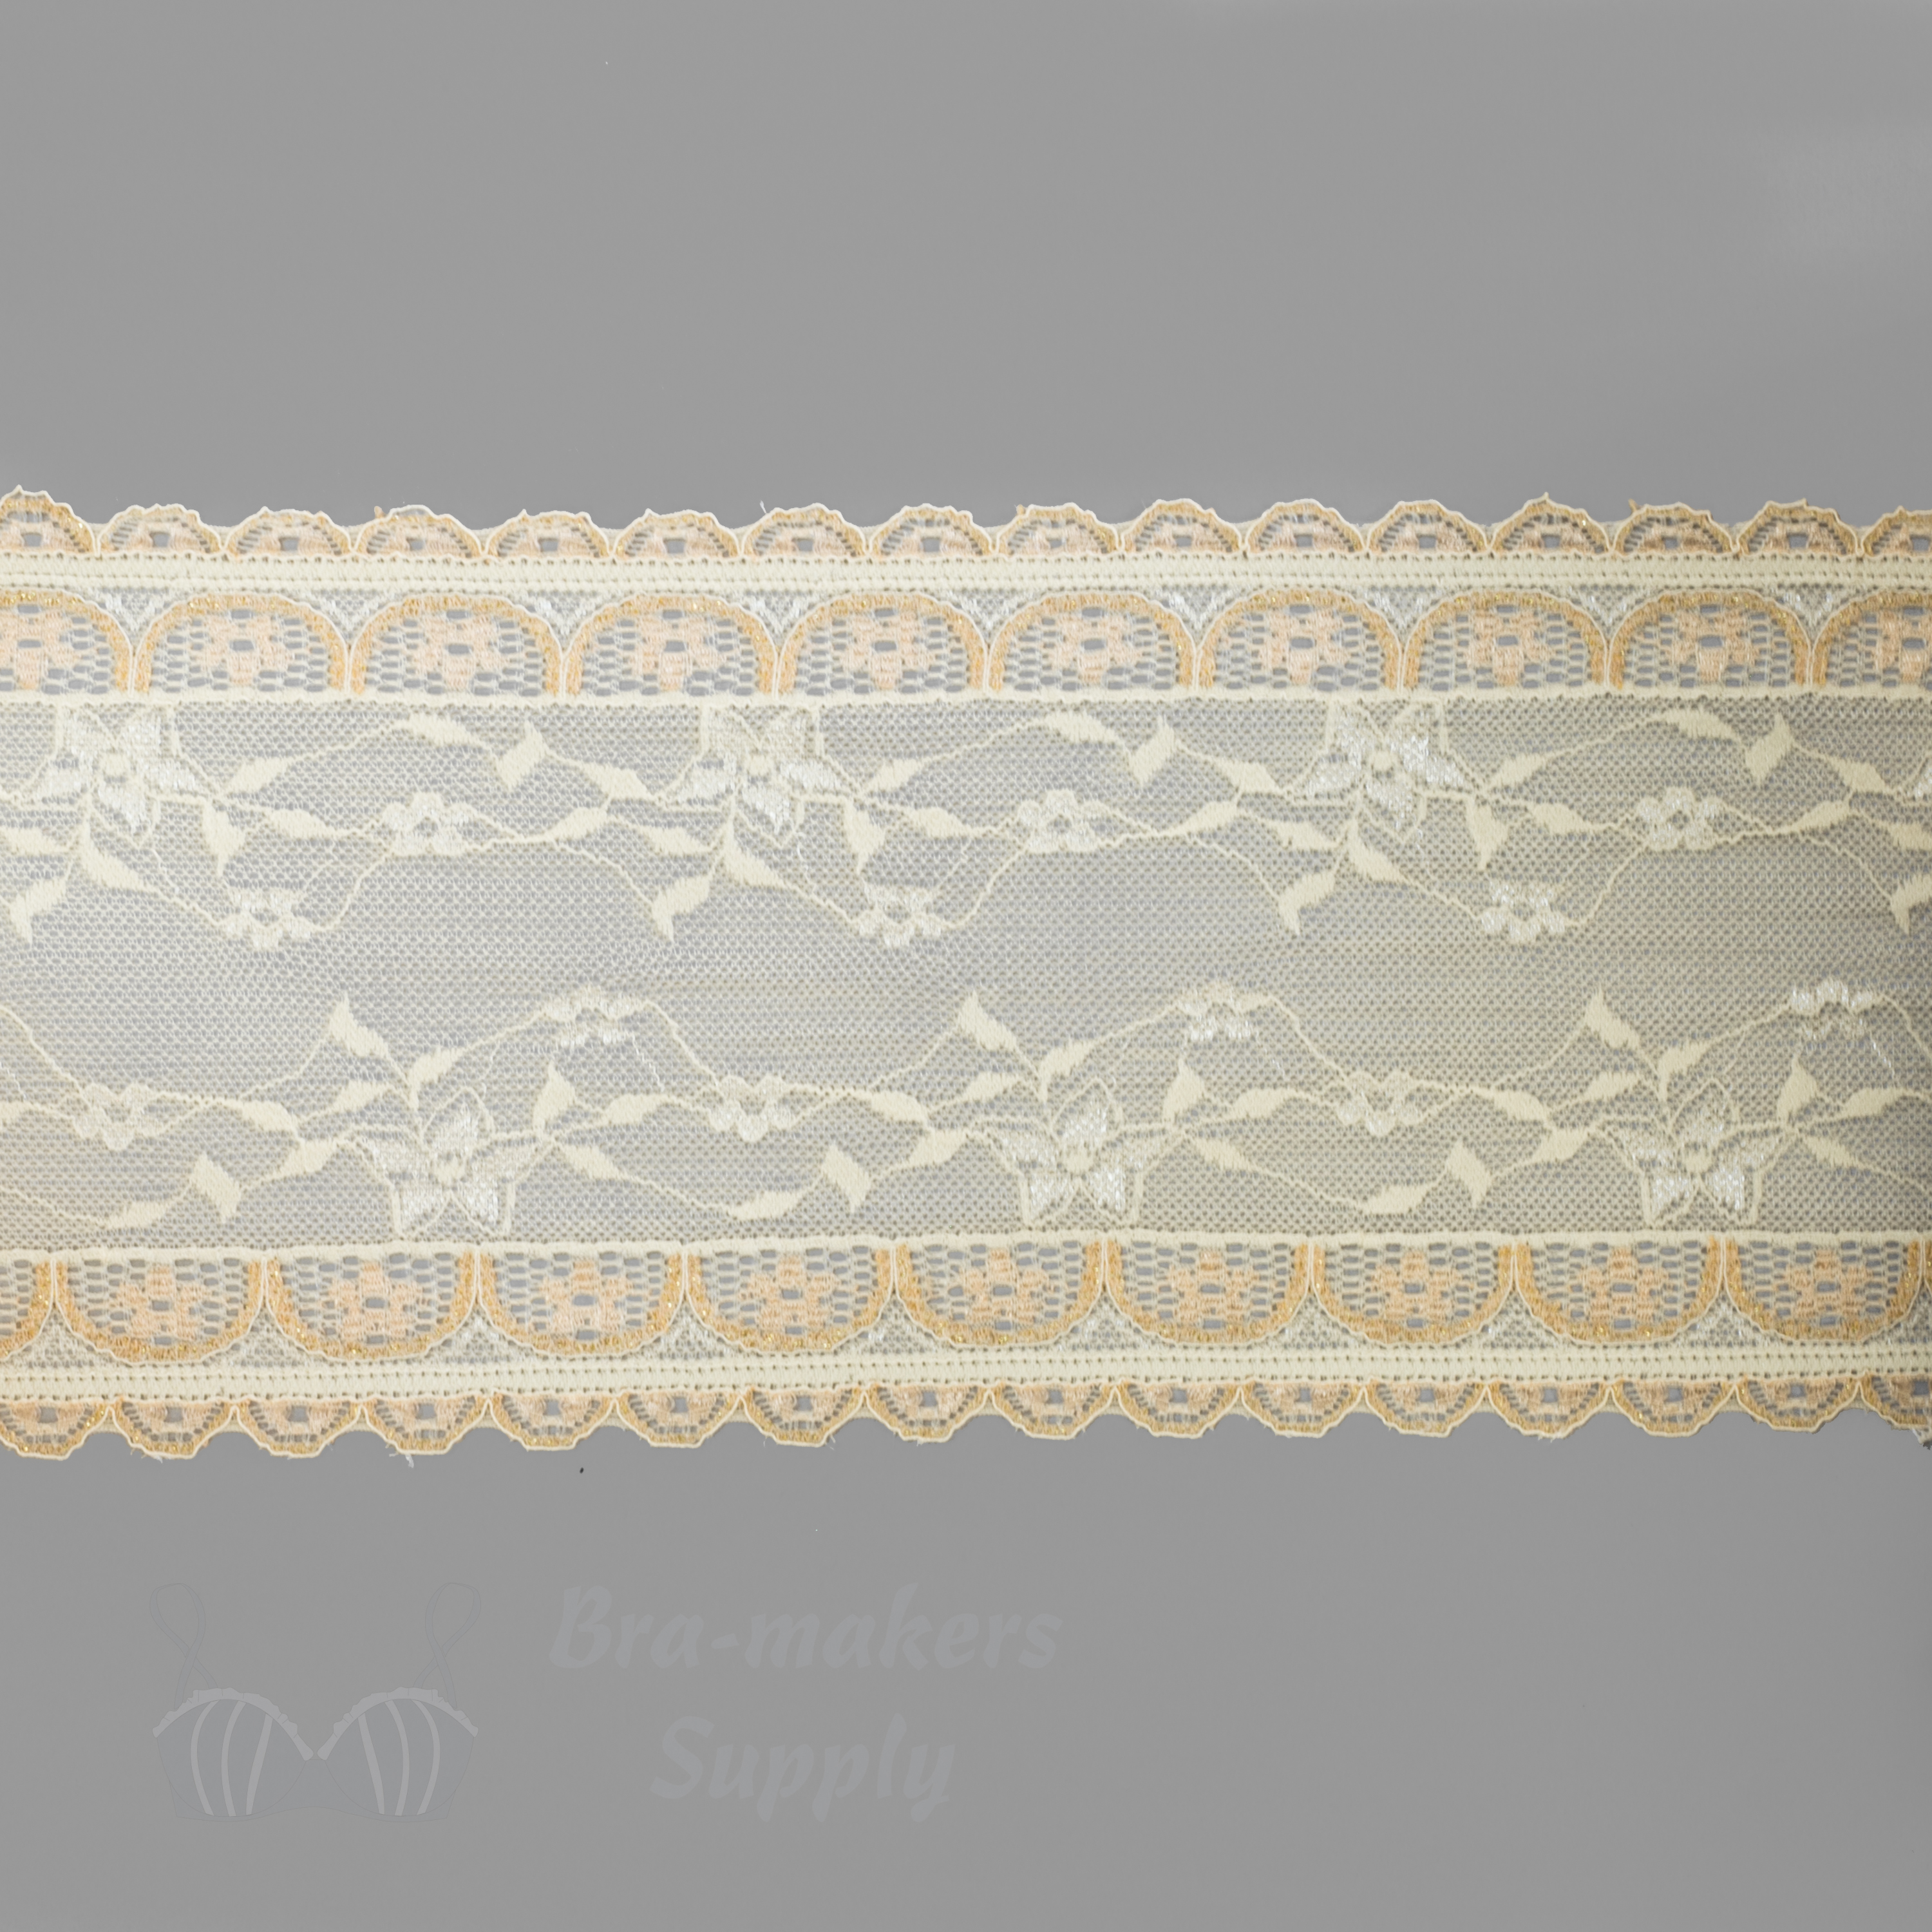 stretch laces - 5 inch - 13 cm five inch ivory apricot scalloped edge stretch lace LS-63 2035 from Bra-Makers Supply